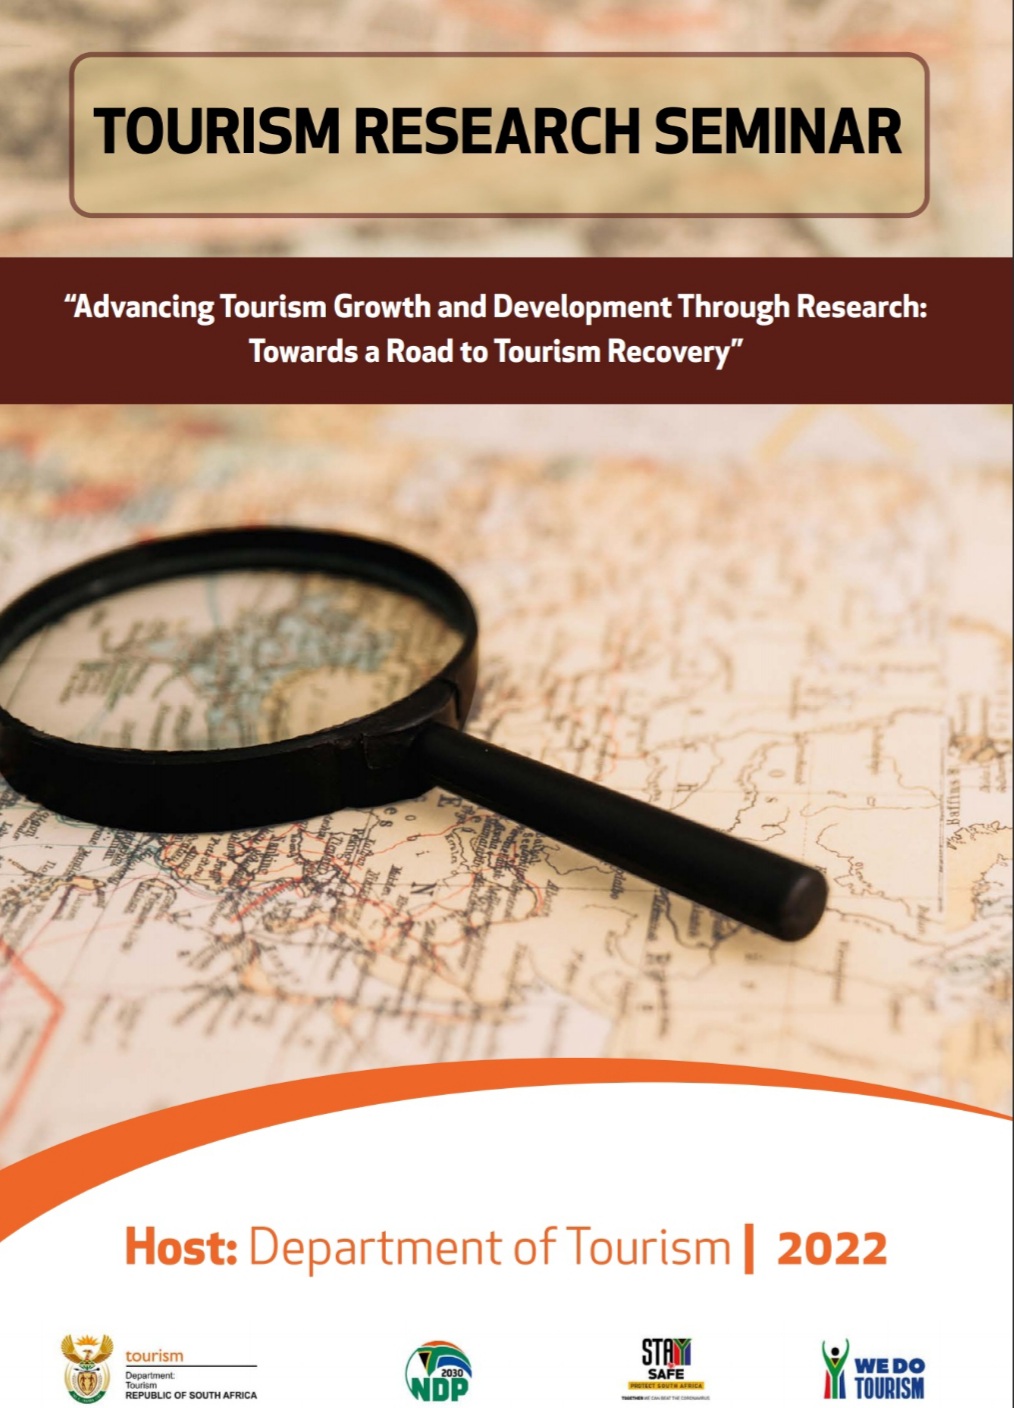 Research guides the way to tourism recovery